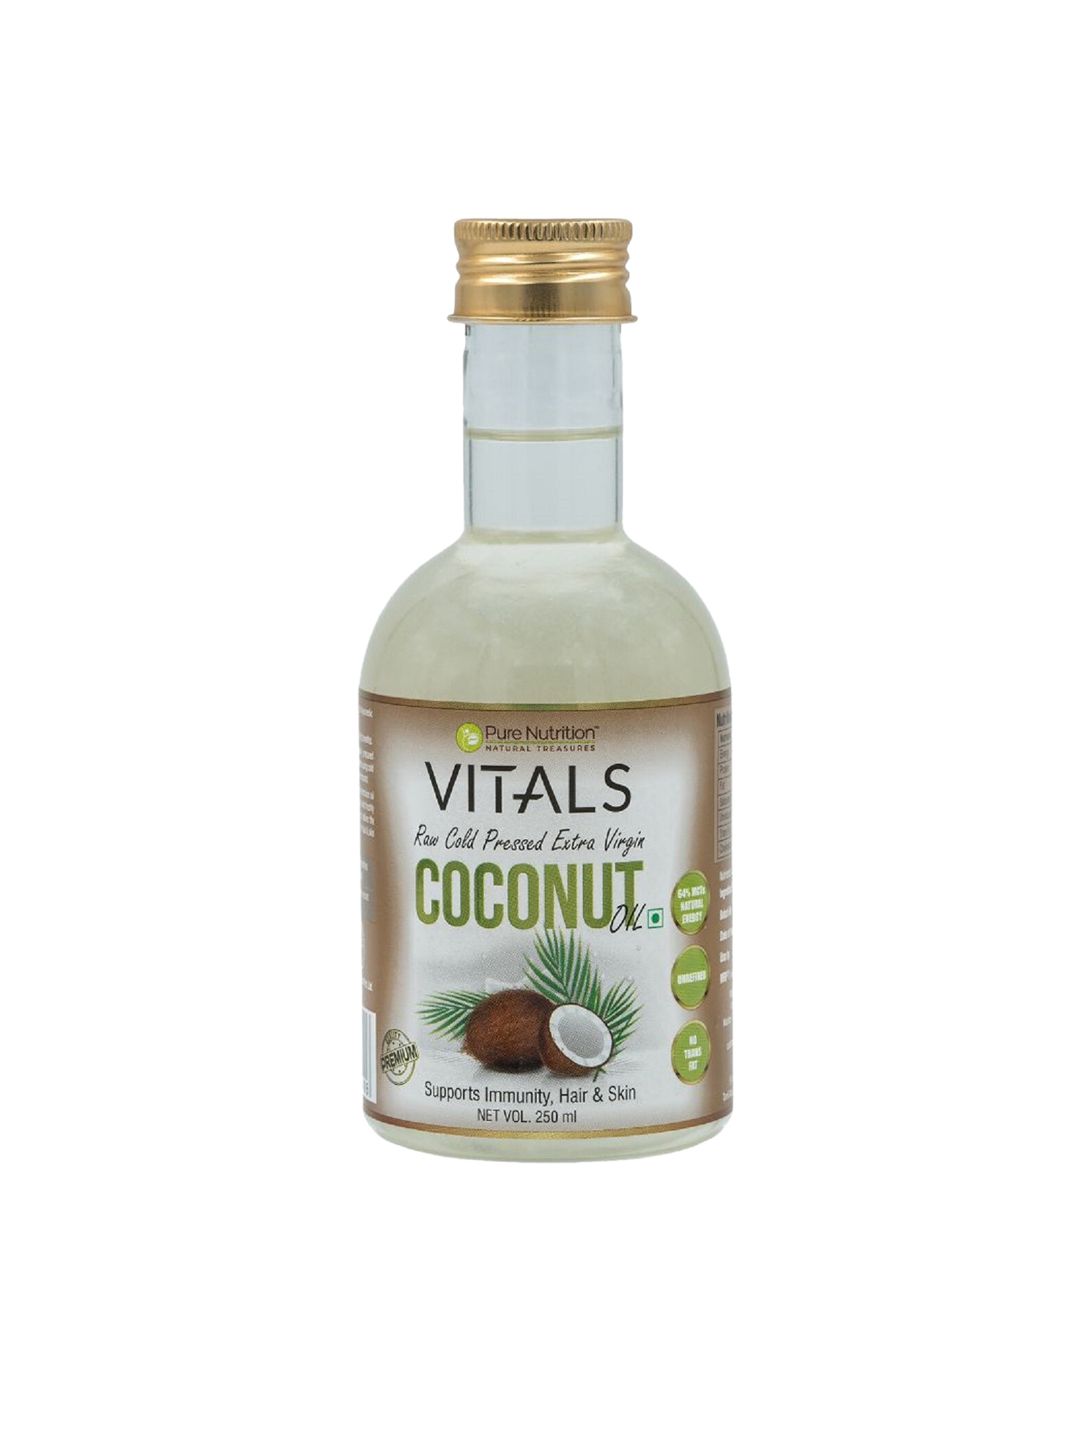 Pure Nutrition Vitals Raw Cold Pressed Extra Virgin Coconut Oil for Skin & Hair - 250ml Price in India